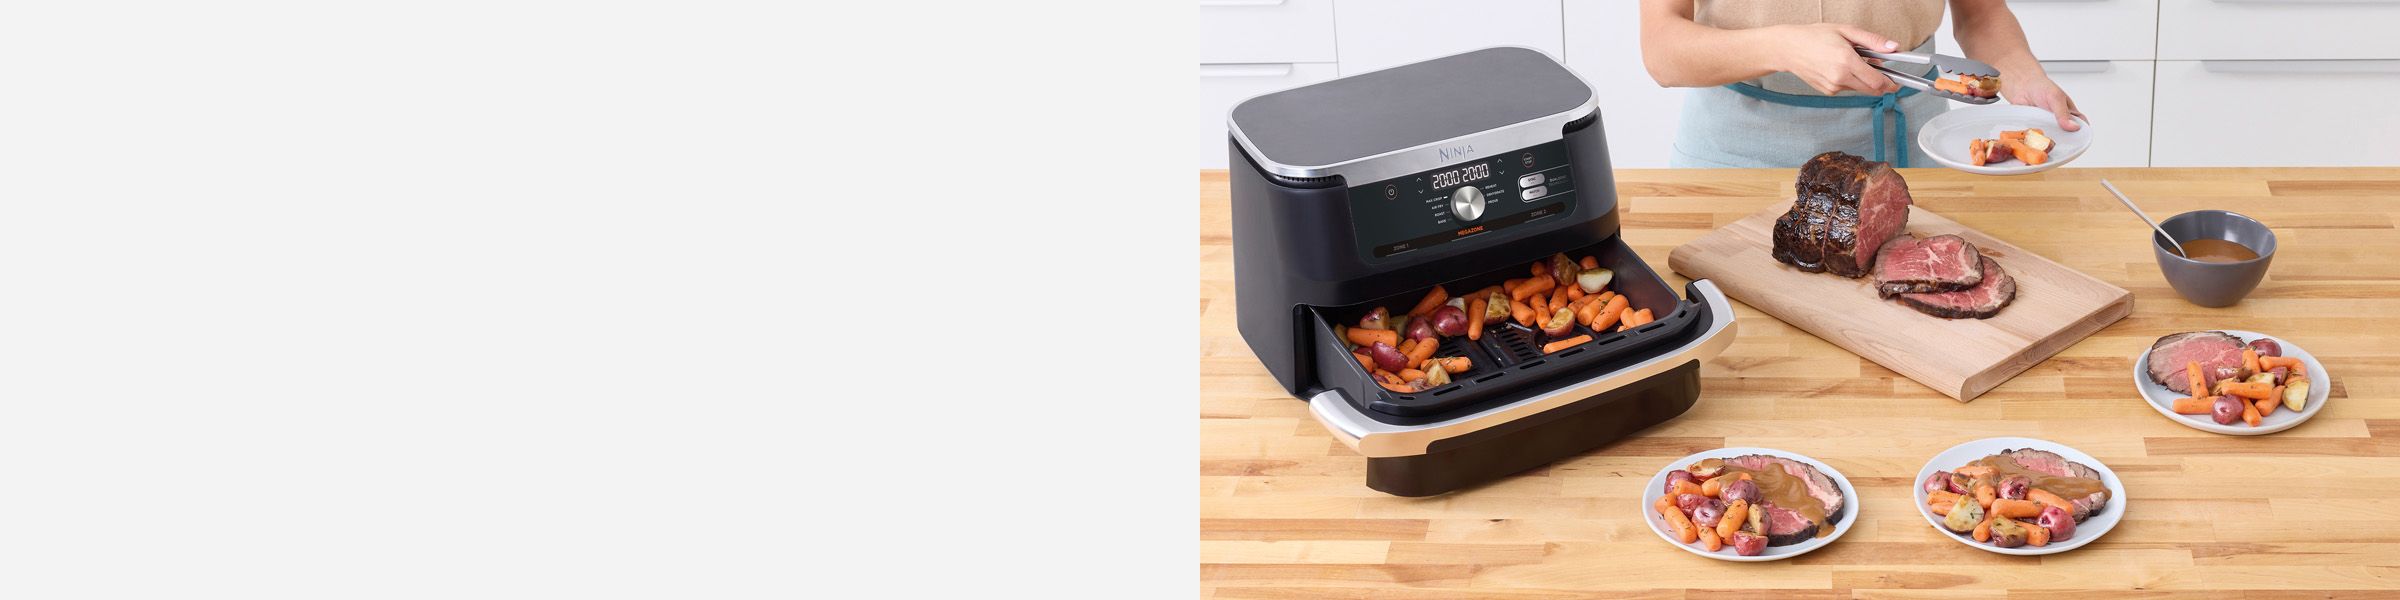 Ninja Foodi FlexDrawer Air Fryer, Dual Zone with Removable Divider, Large 10.4L